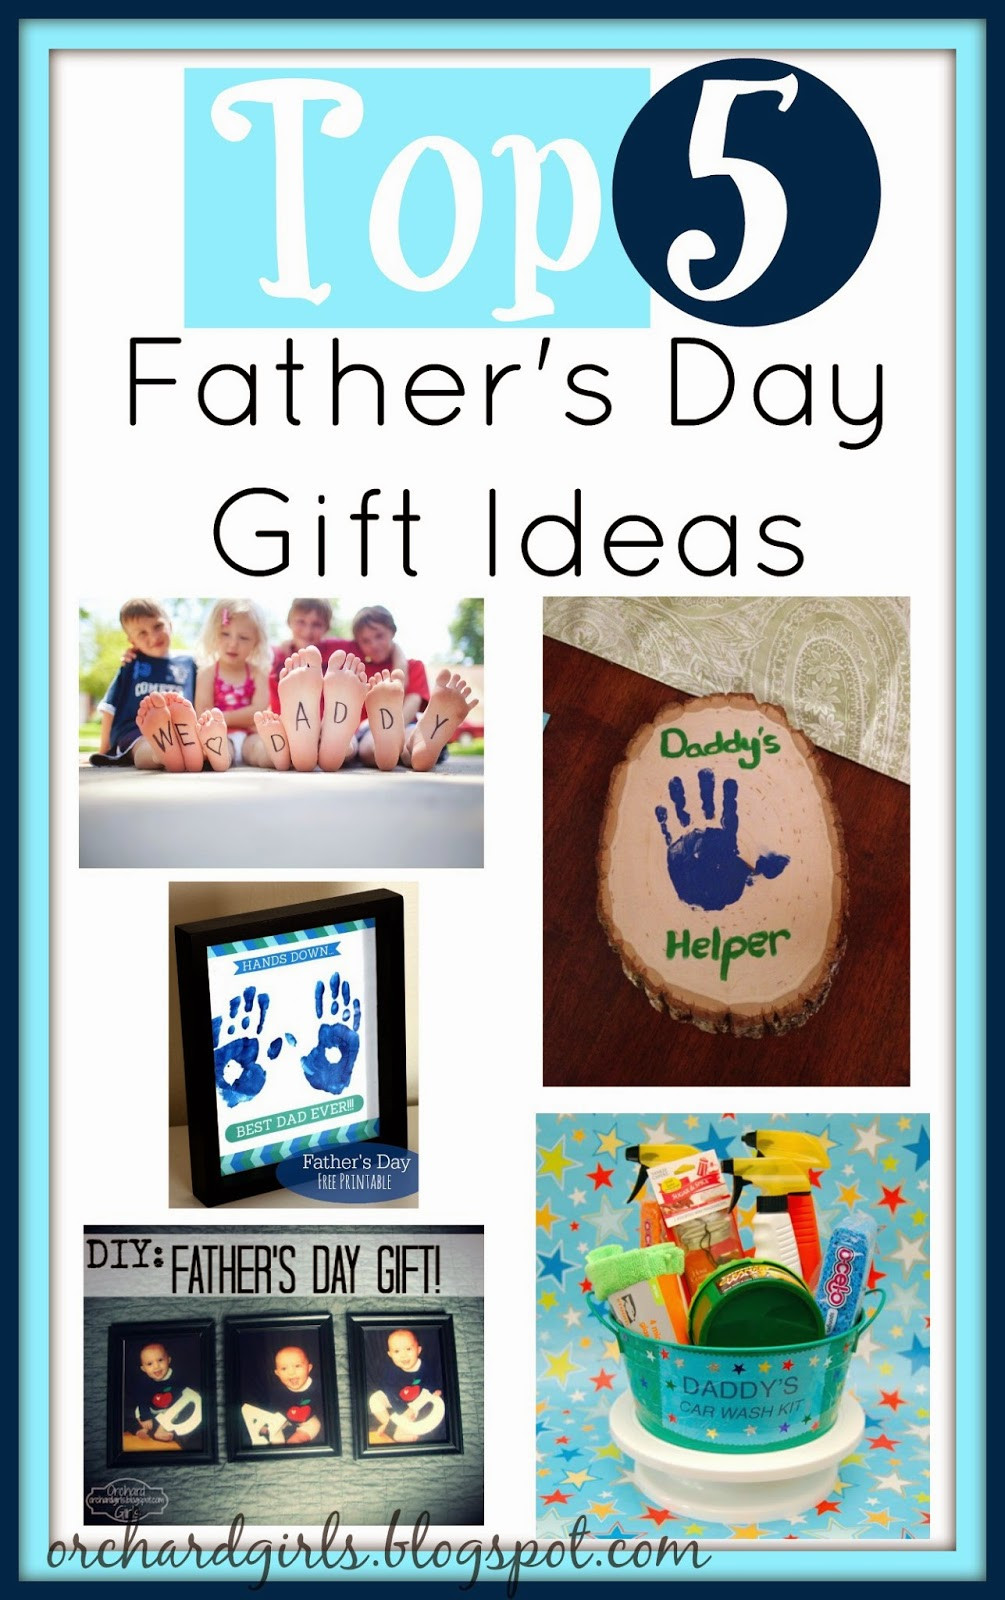 Fathers Day Gifts From Children
 Orchard Girls Top 5 Father s Day Gift Ideas from Kids